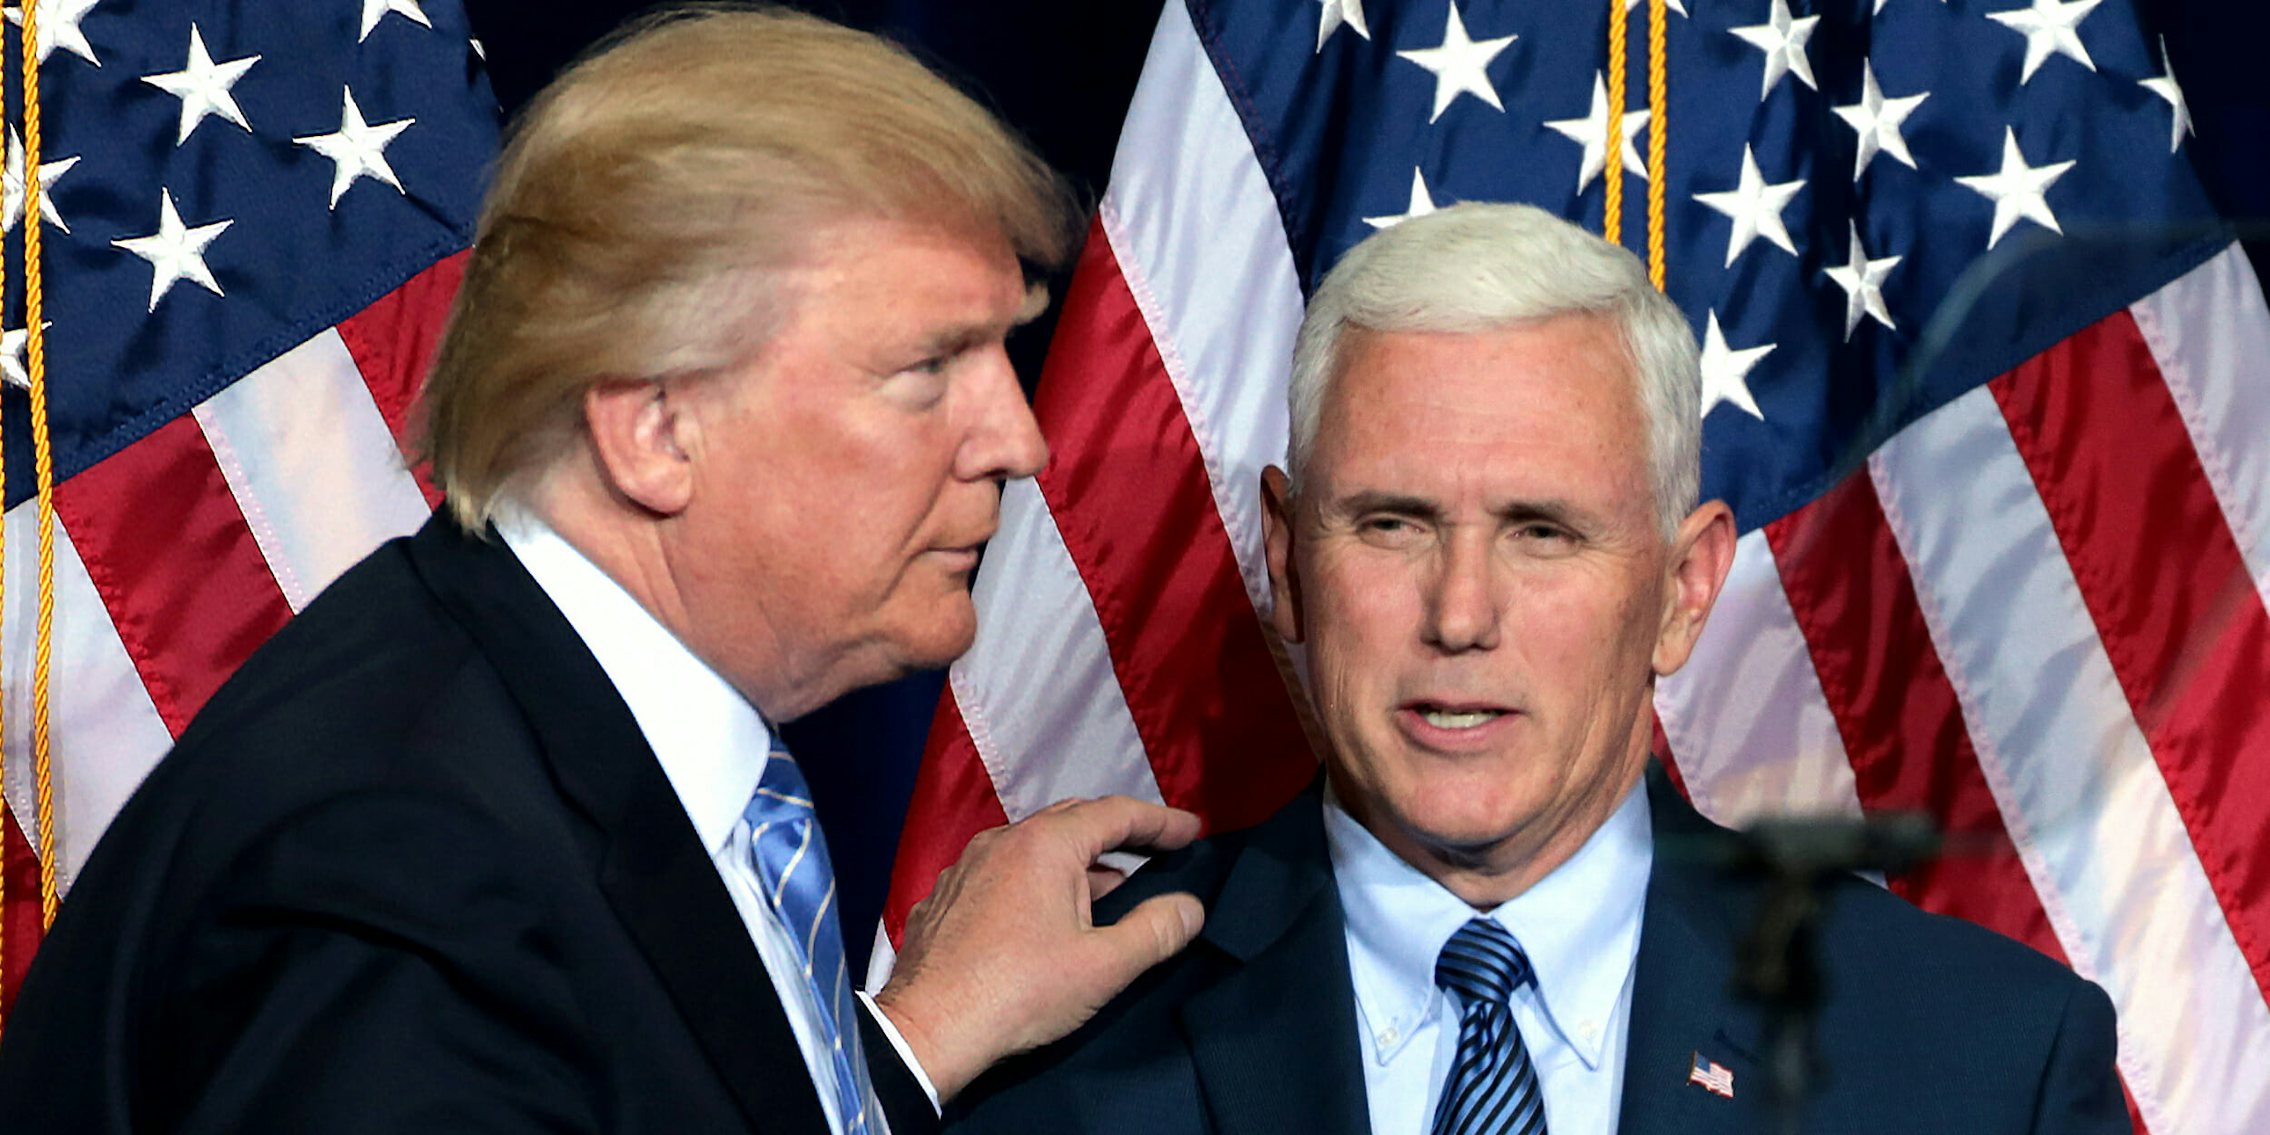 Donald Trump puts his hand on Mike Pence's shoulder